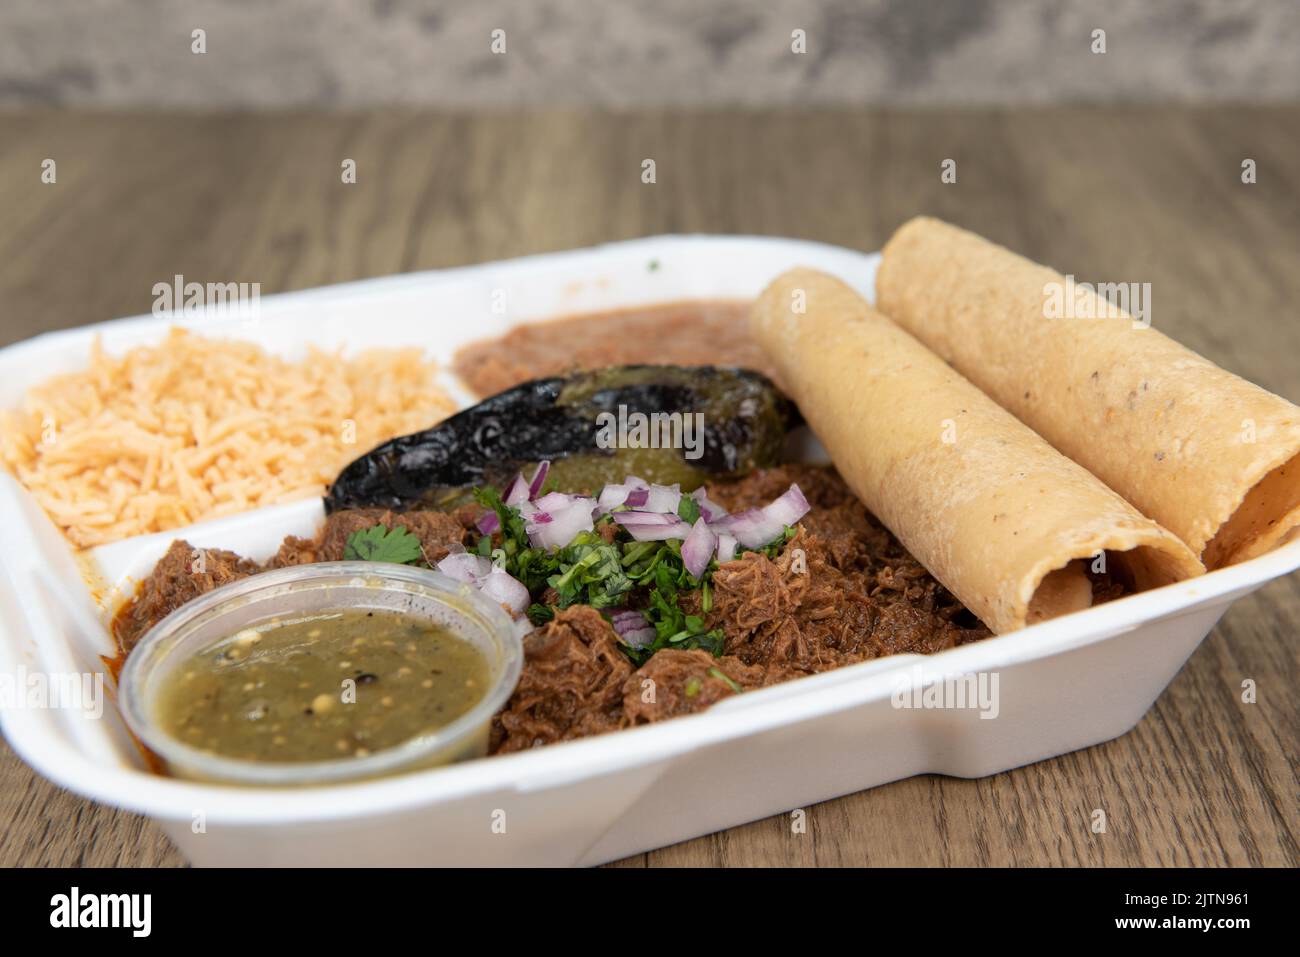 Generous serving of slow cooked birria meat, served with corn tortillas, rice, beans, and salsa for a tempting meal. Stock Photo